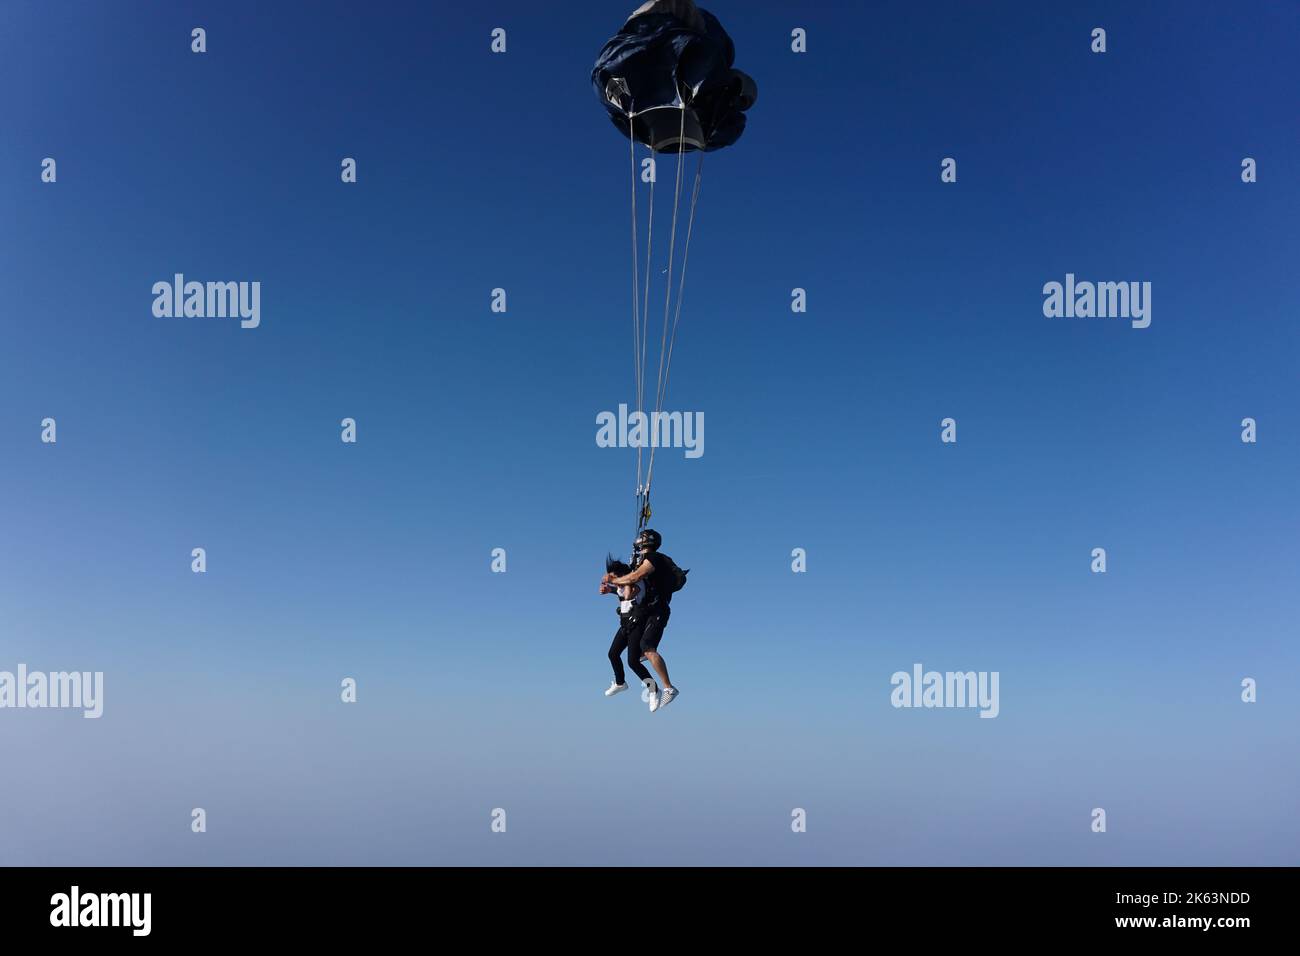 Dubai, United Arab Emirates: certified skydiving tandem instructor, with a first-timer attached via harness, releases the parachute to stop free fall. Stock Photo